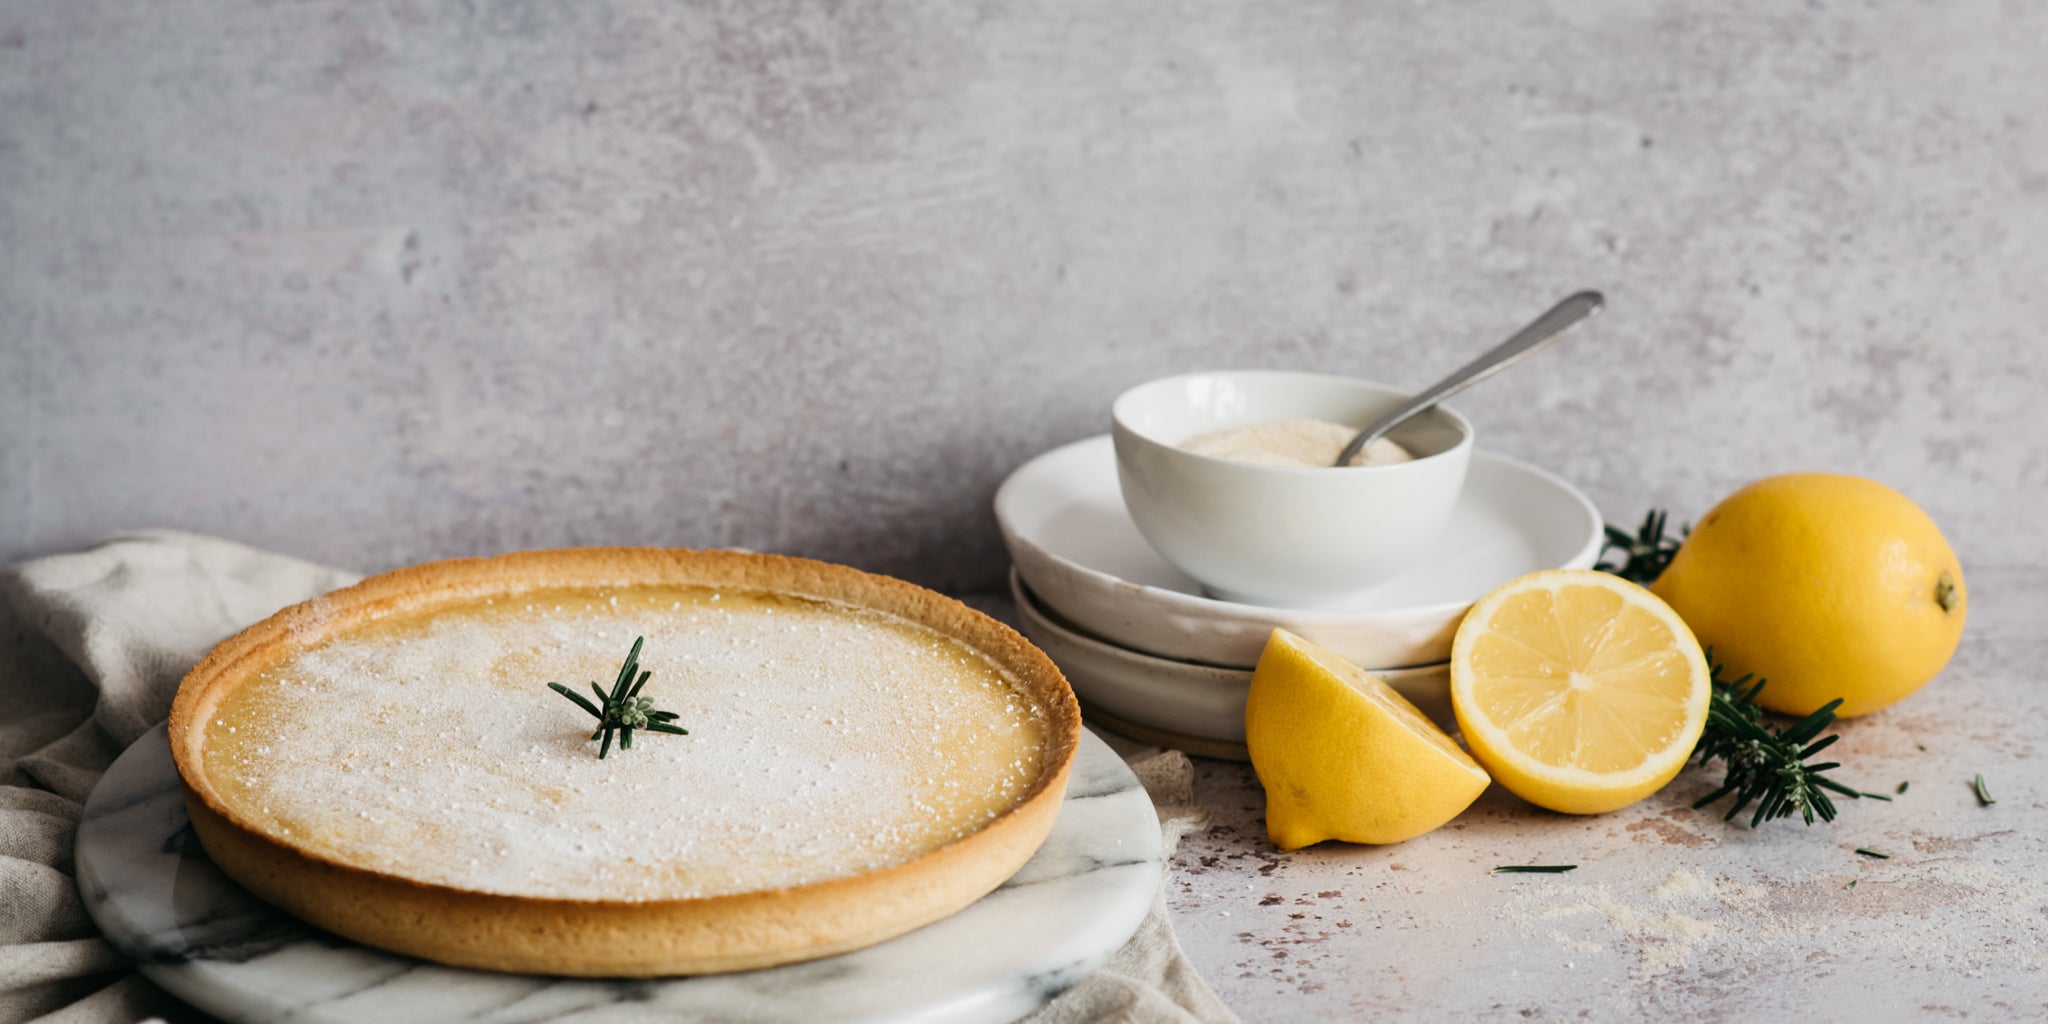 Baked Lemon Tart dusted with Silver Spoon Icing Sugar, next to sliced lemon 